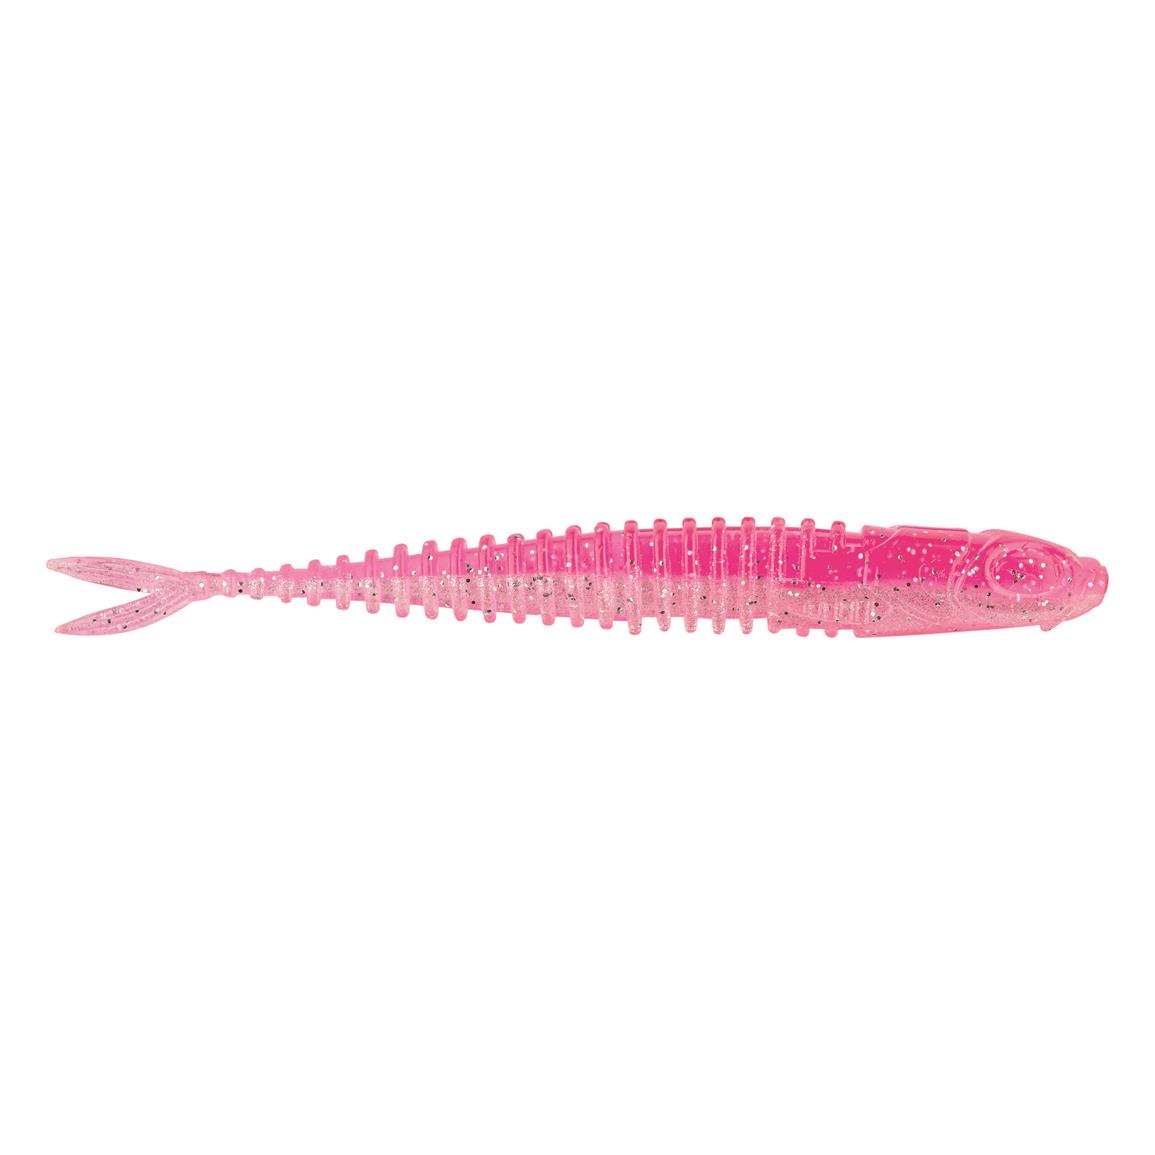 Northland Eye-Candy Minnows, 5 Pack, Pink Silver